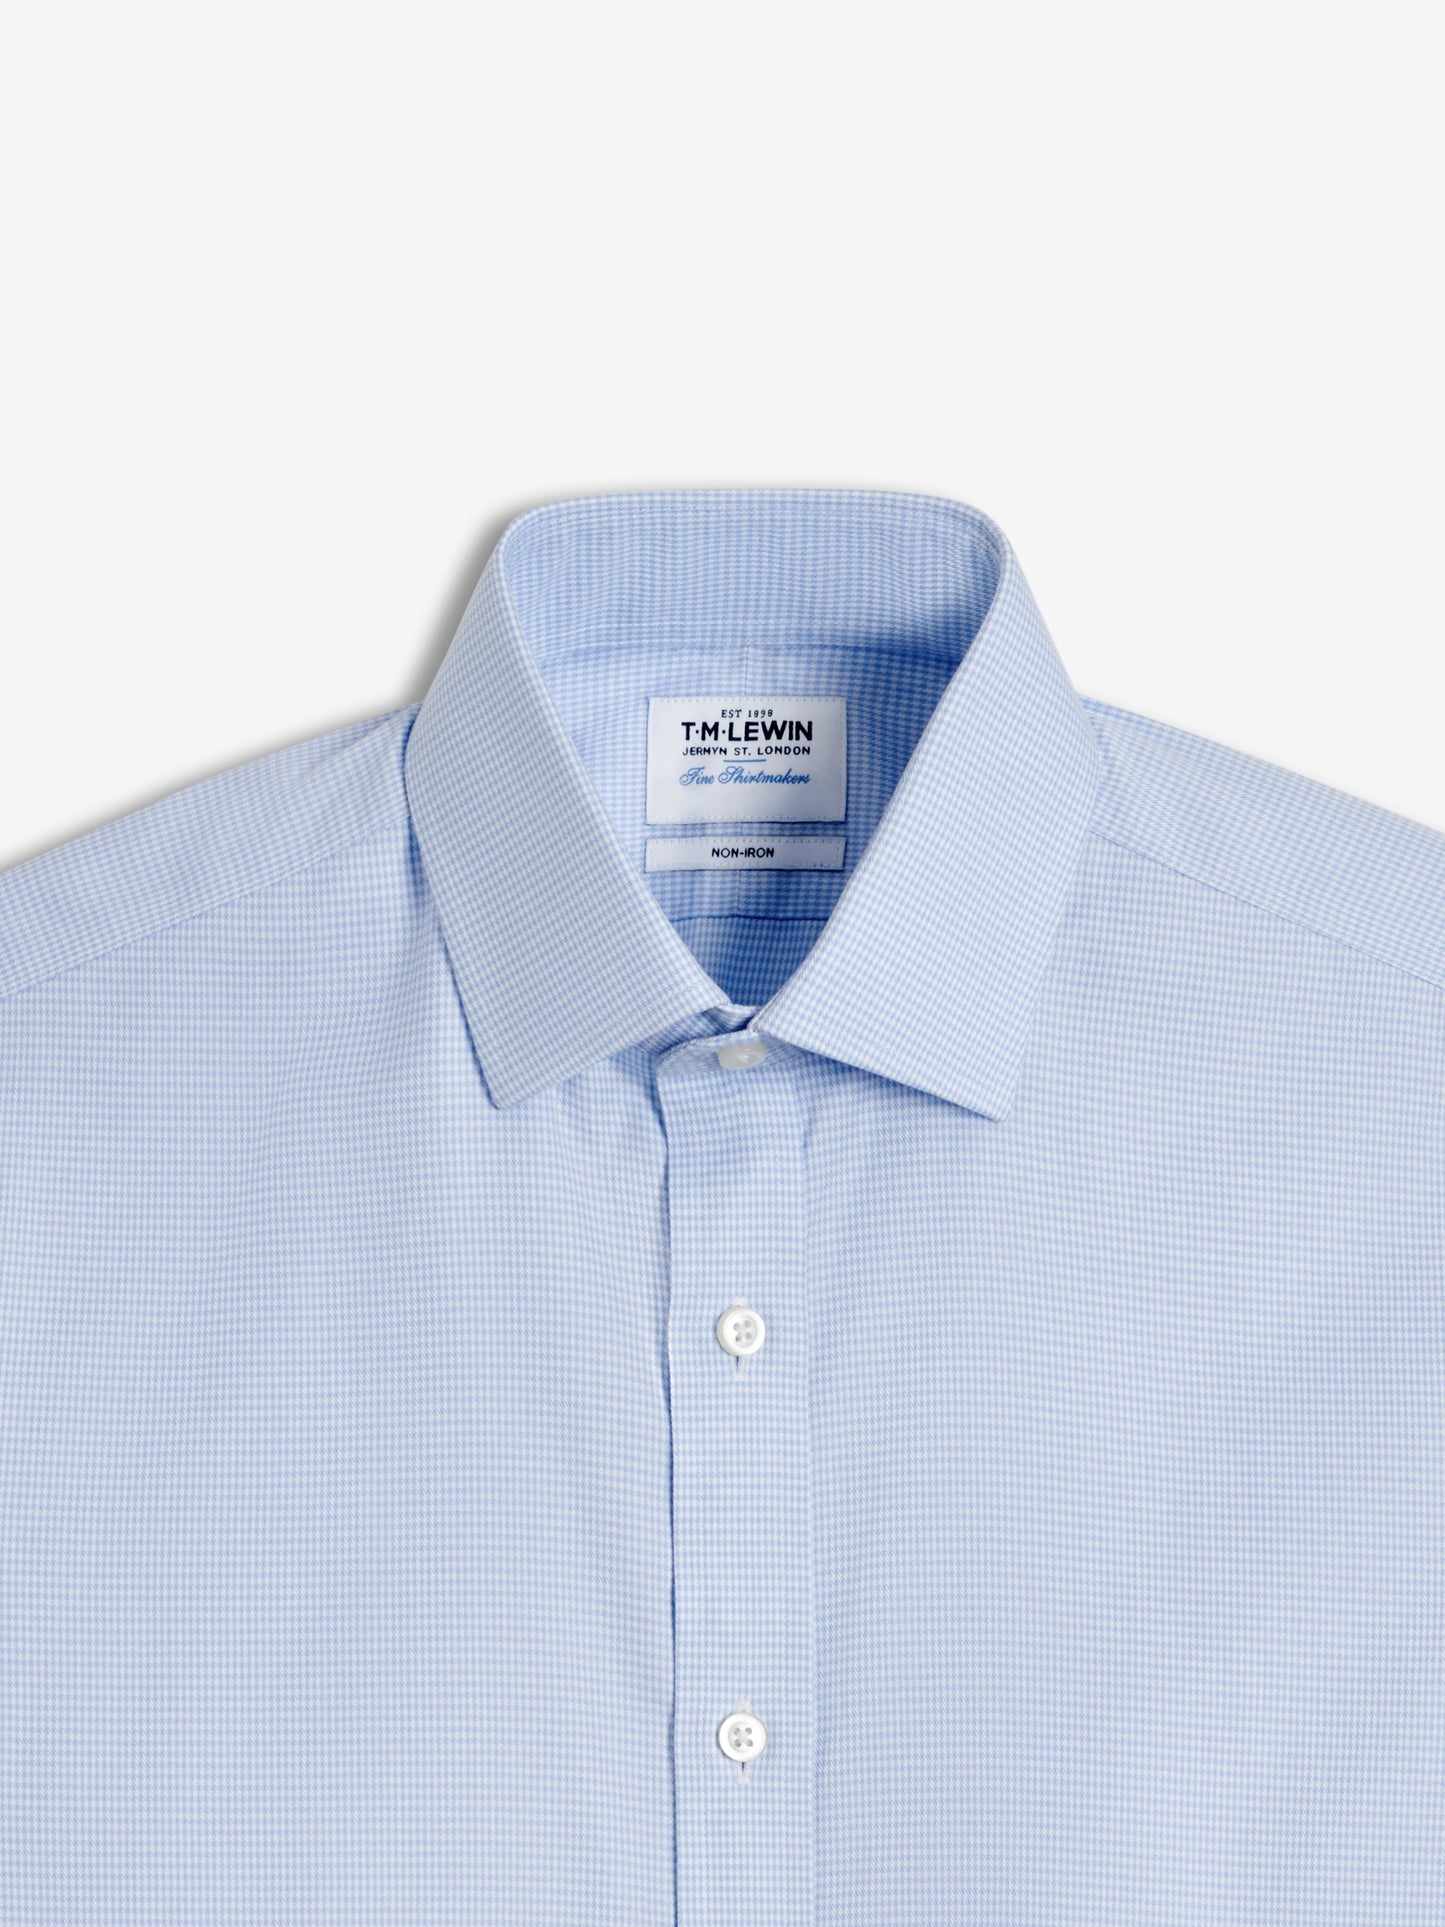 Image 8 of Non-Iron Light Blue Dogtooth Twill Slim Fit Double Cuff Classic Collar Shirt